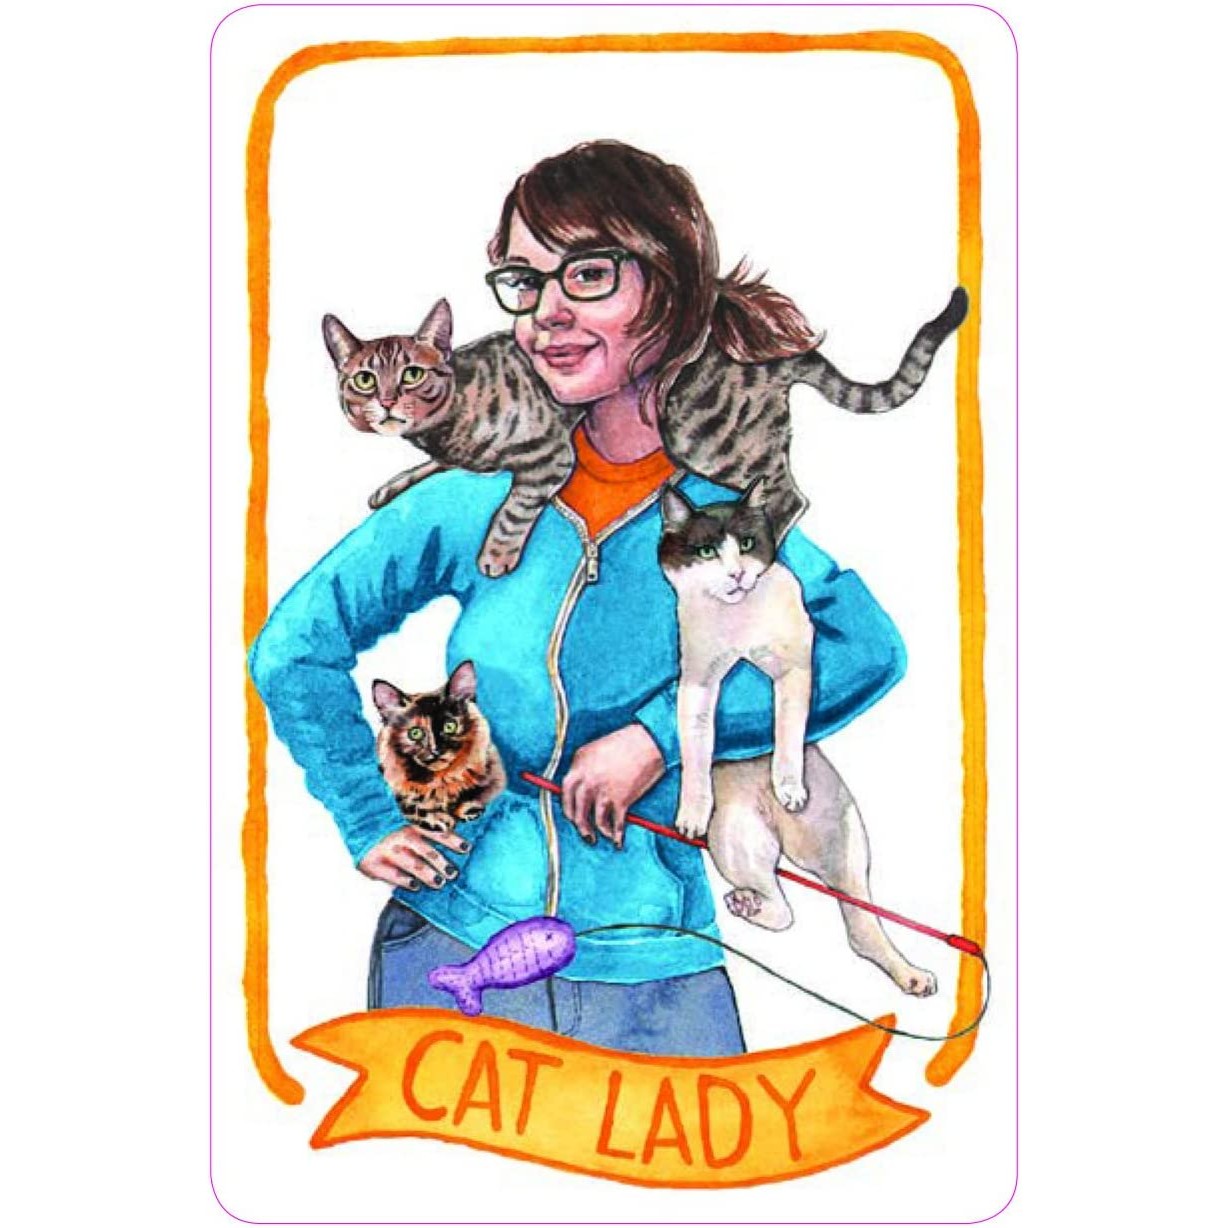 The main 'cat lady' card from a cat lady old maid game.